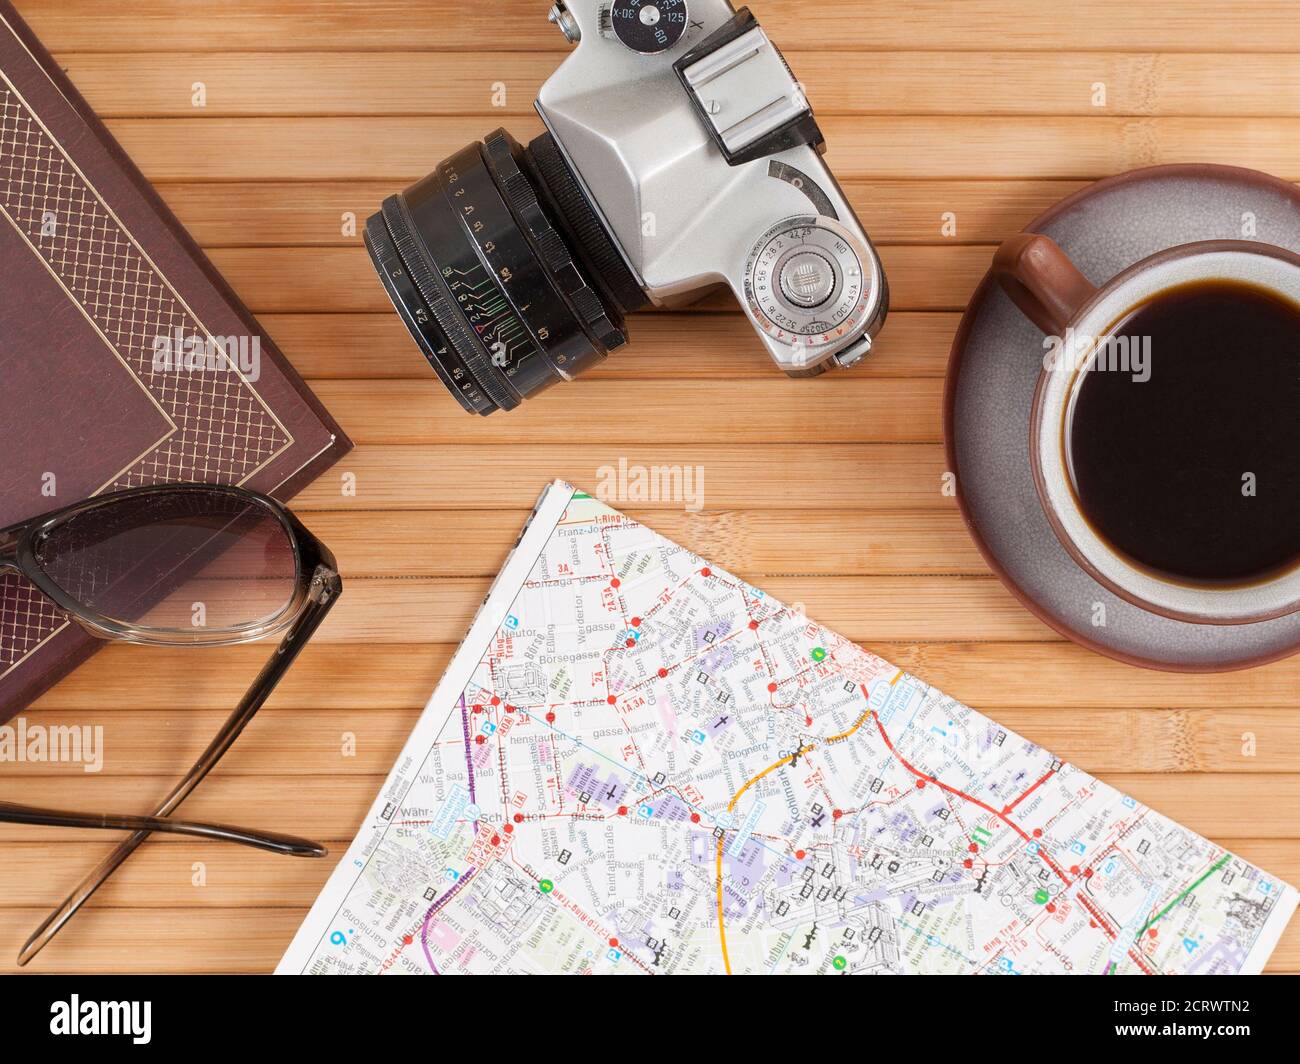 Travel preparations essentials world map cup of coffee vintage film camera notebook Stock Photo